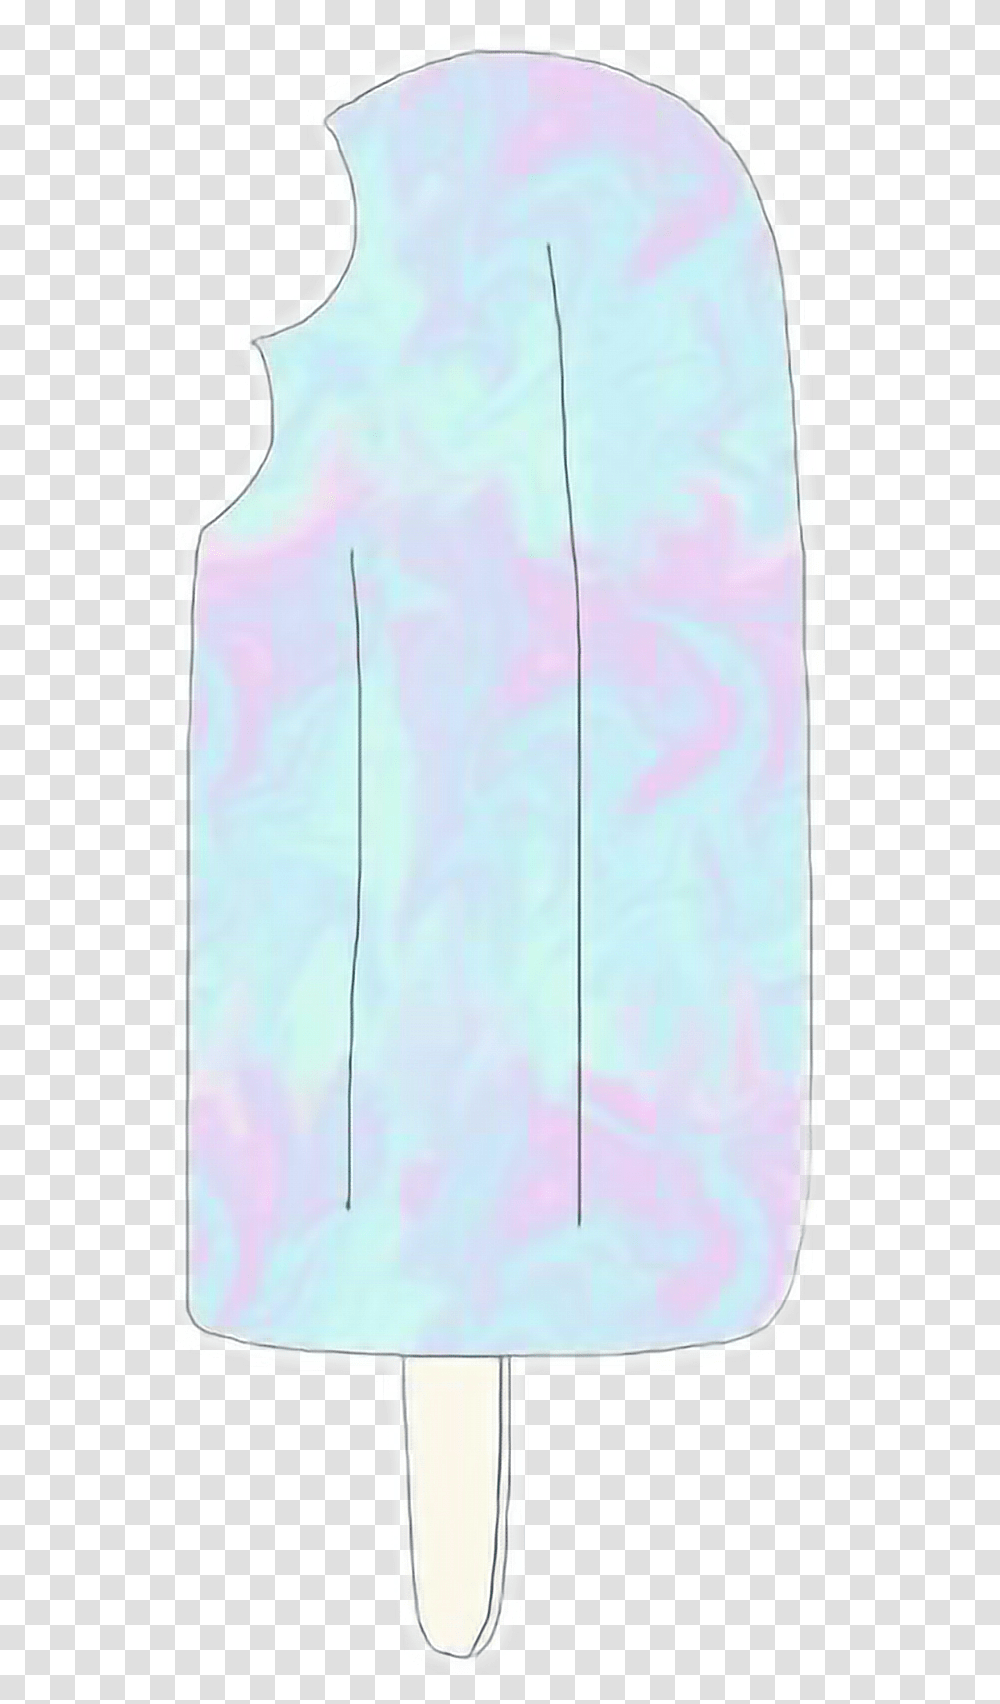 Holo Popsicle Tumblr Pastel Girlyoverlay Windshield, Sea, Outdoors, Water, Nature Transparent Png